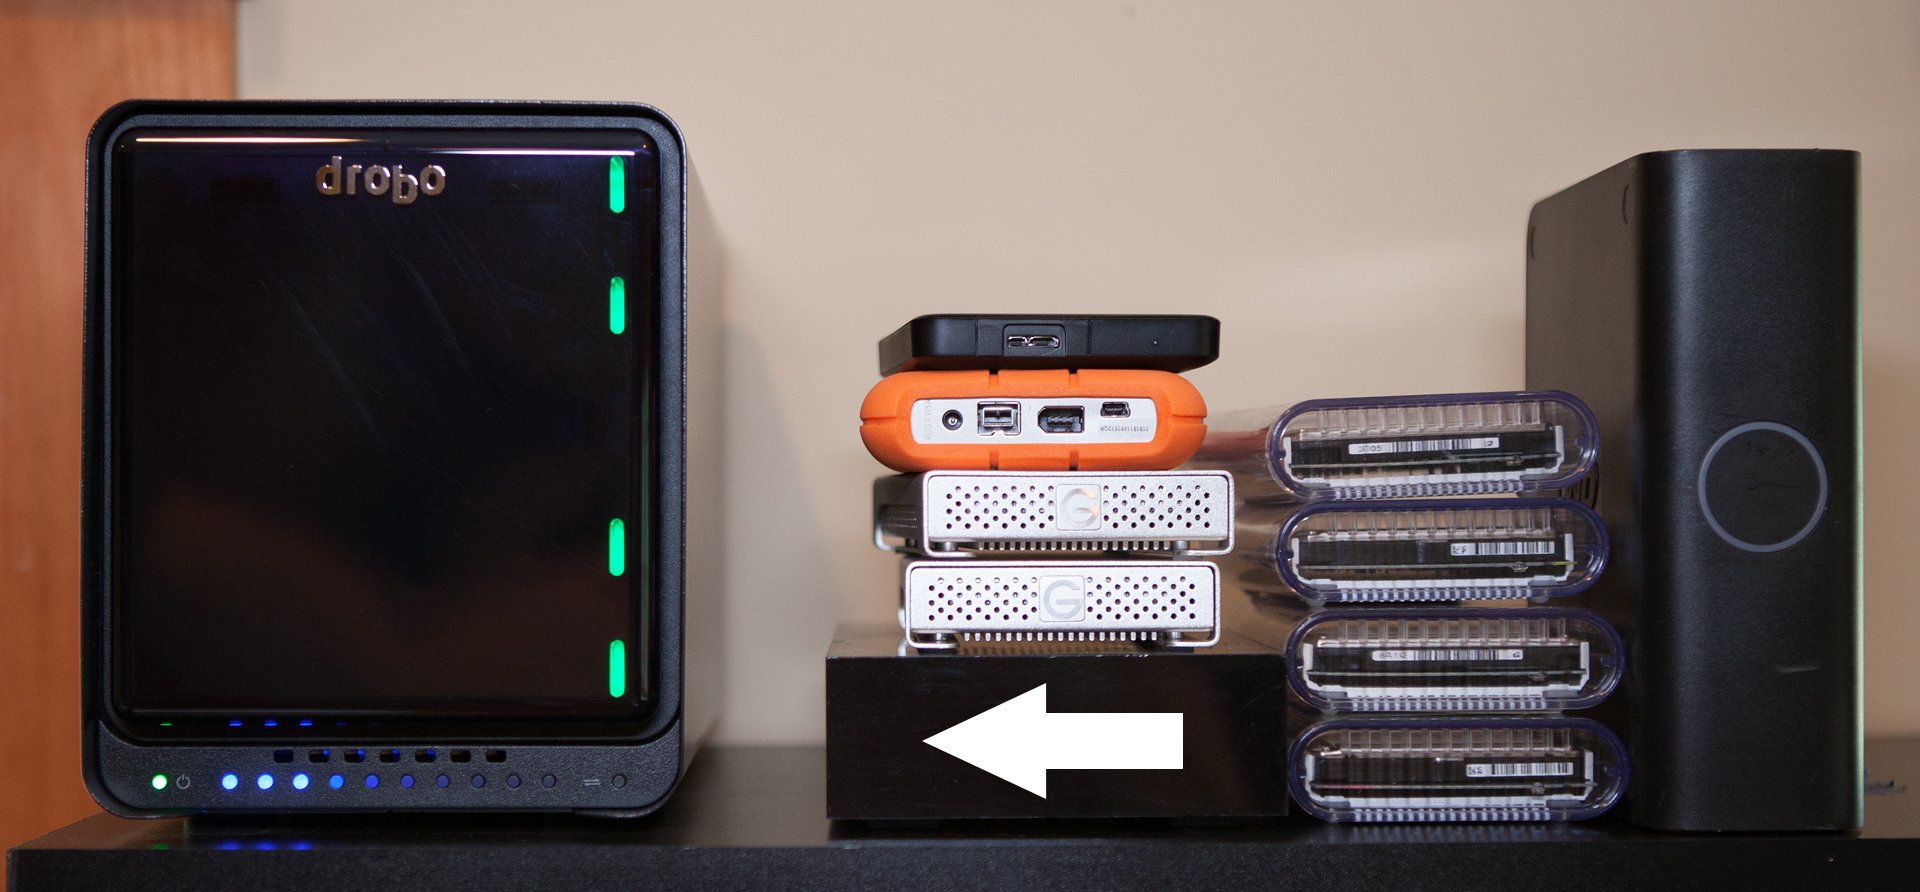 Consolidating and Organizing with the Drobo 5D